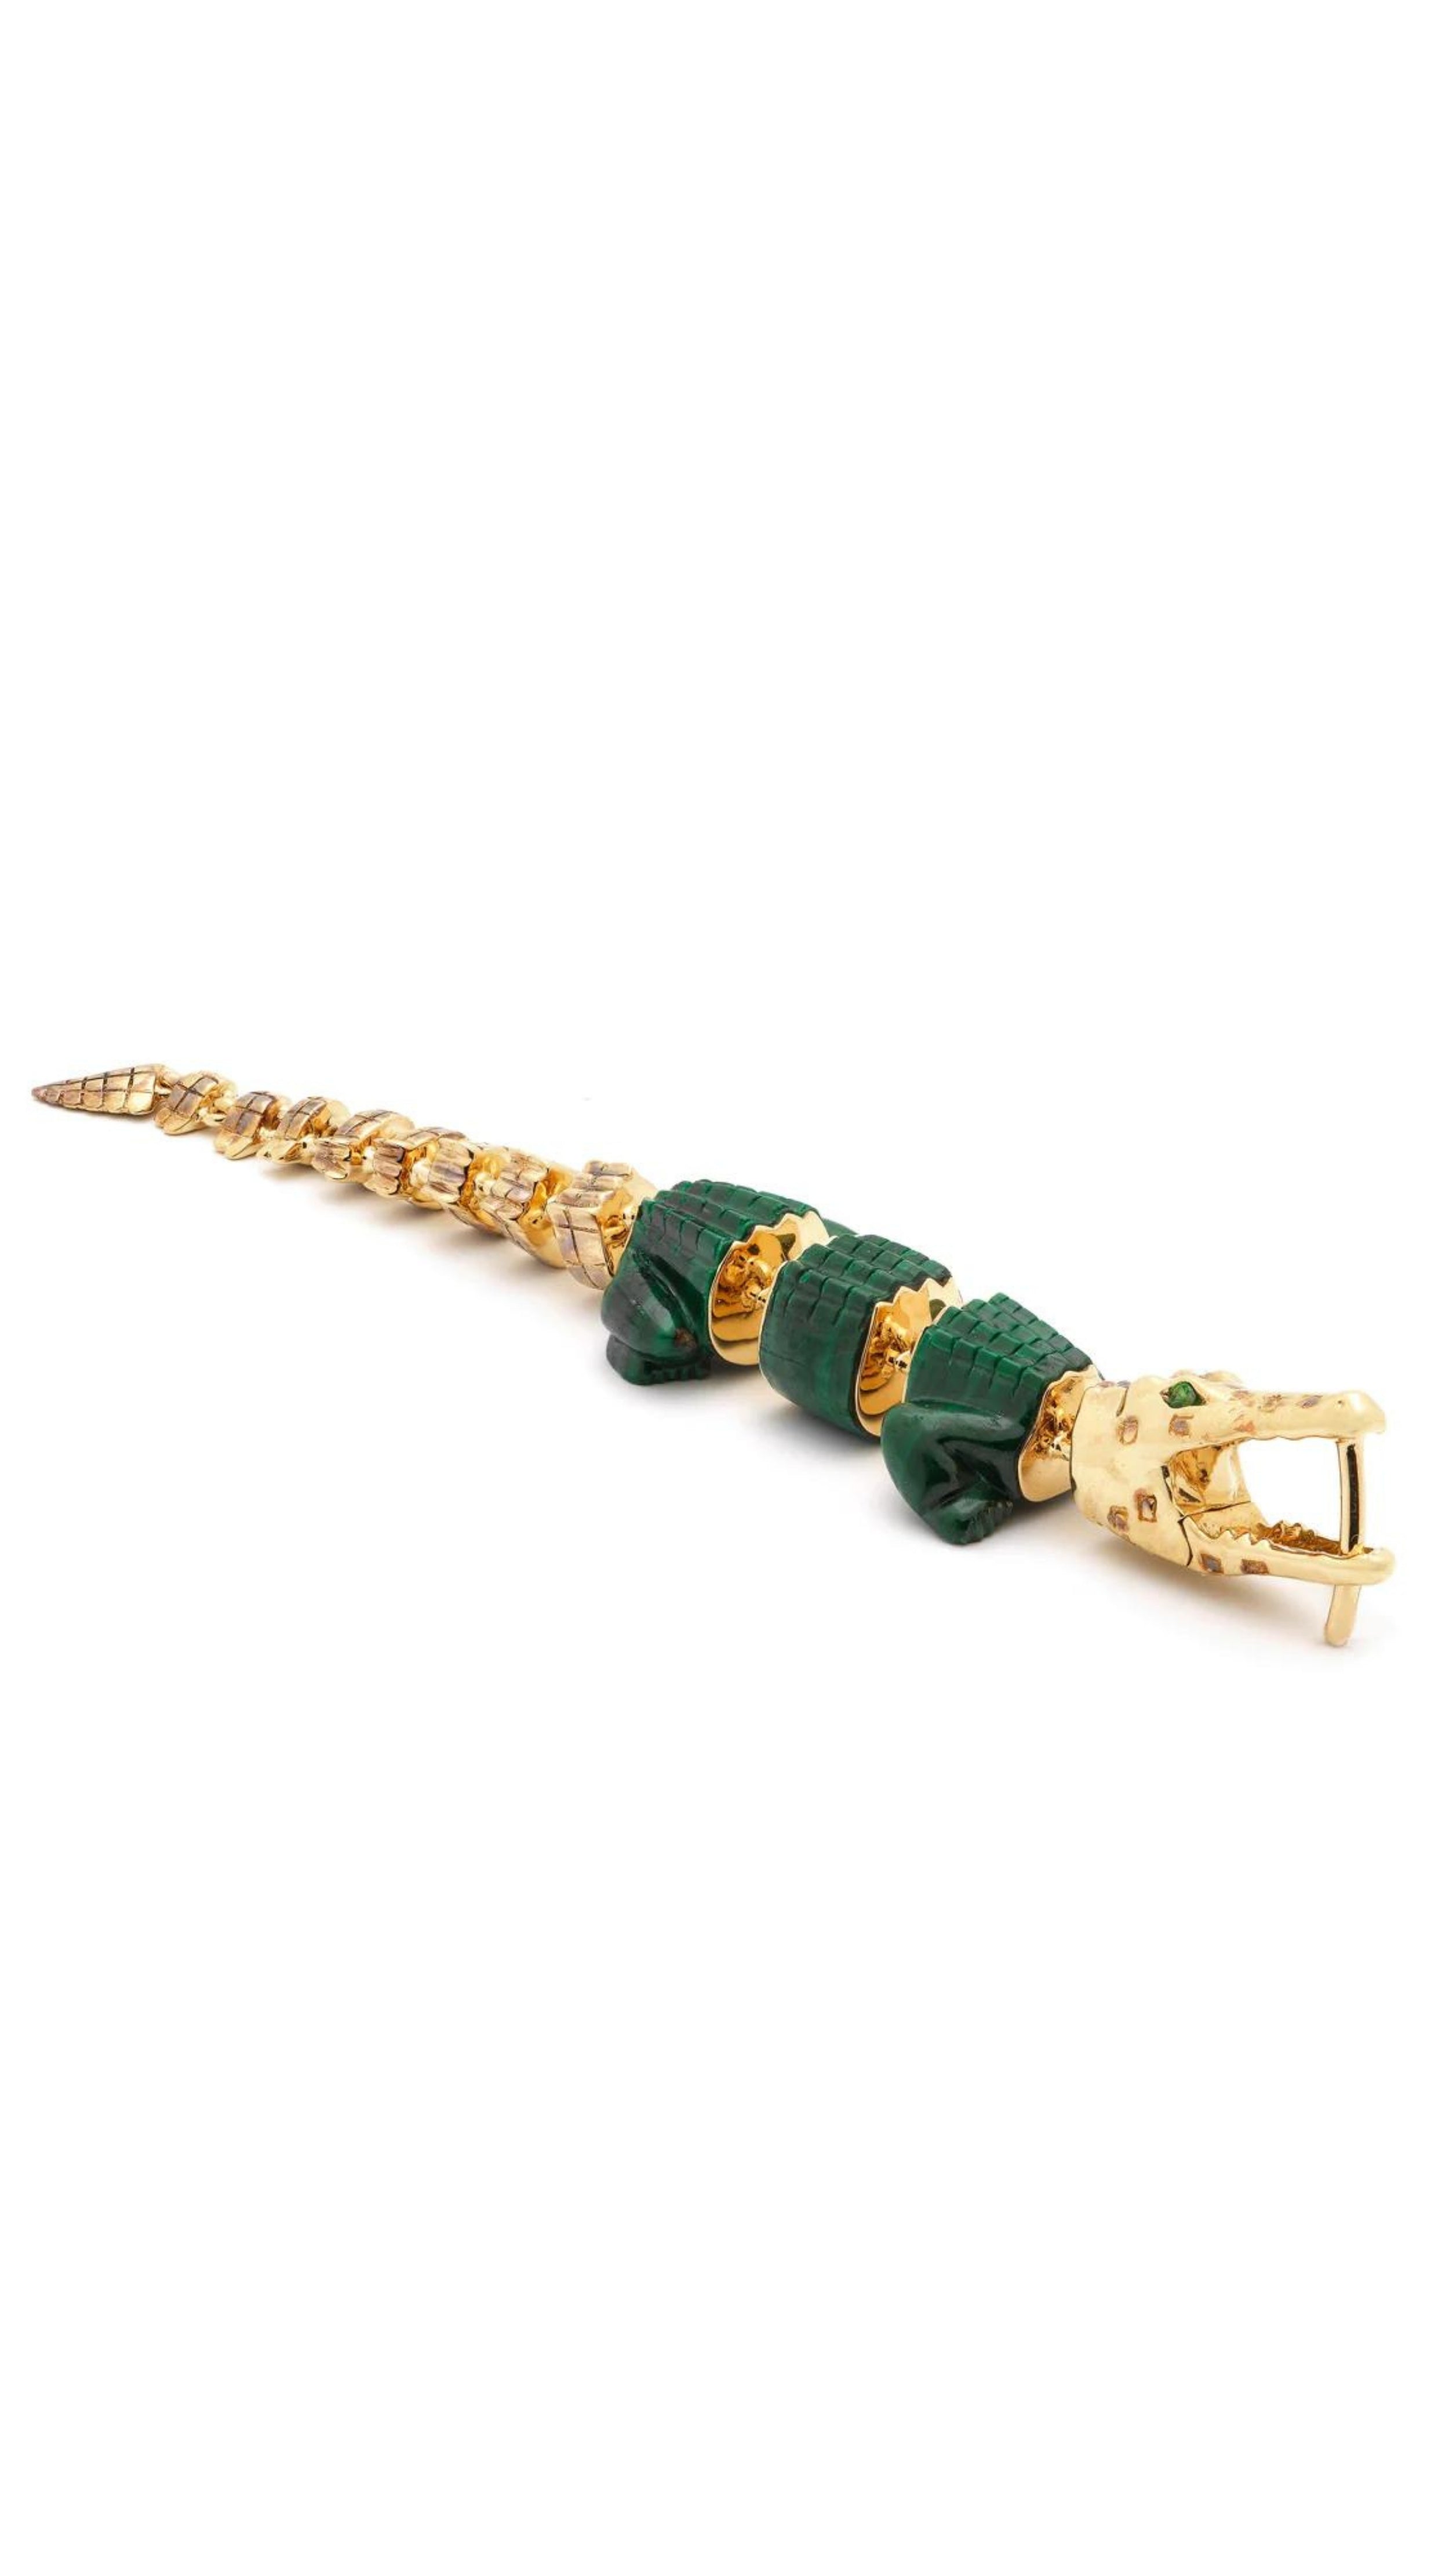 Bibi van der Velden Malachite Alligator Vertebrae Bite Single Earring. Hand-crafted 18K yellow gold earring with spine of the alligator and lifelike malachite body with Tsavorite accents. It has a unique bite clasp and moving tail. Shown laying flat